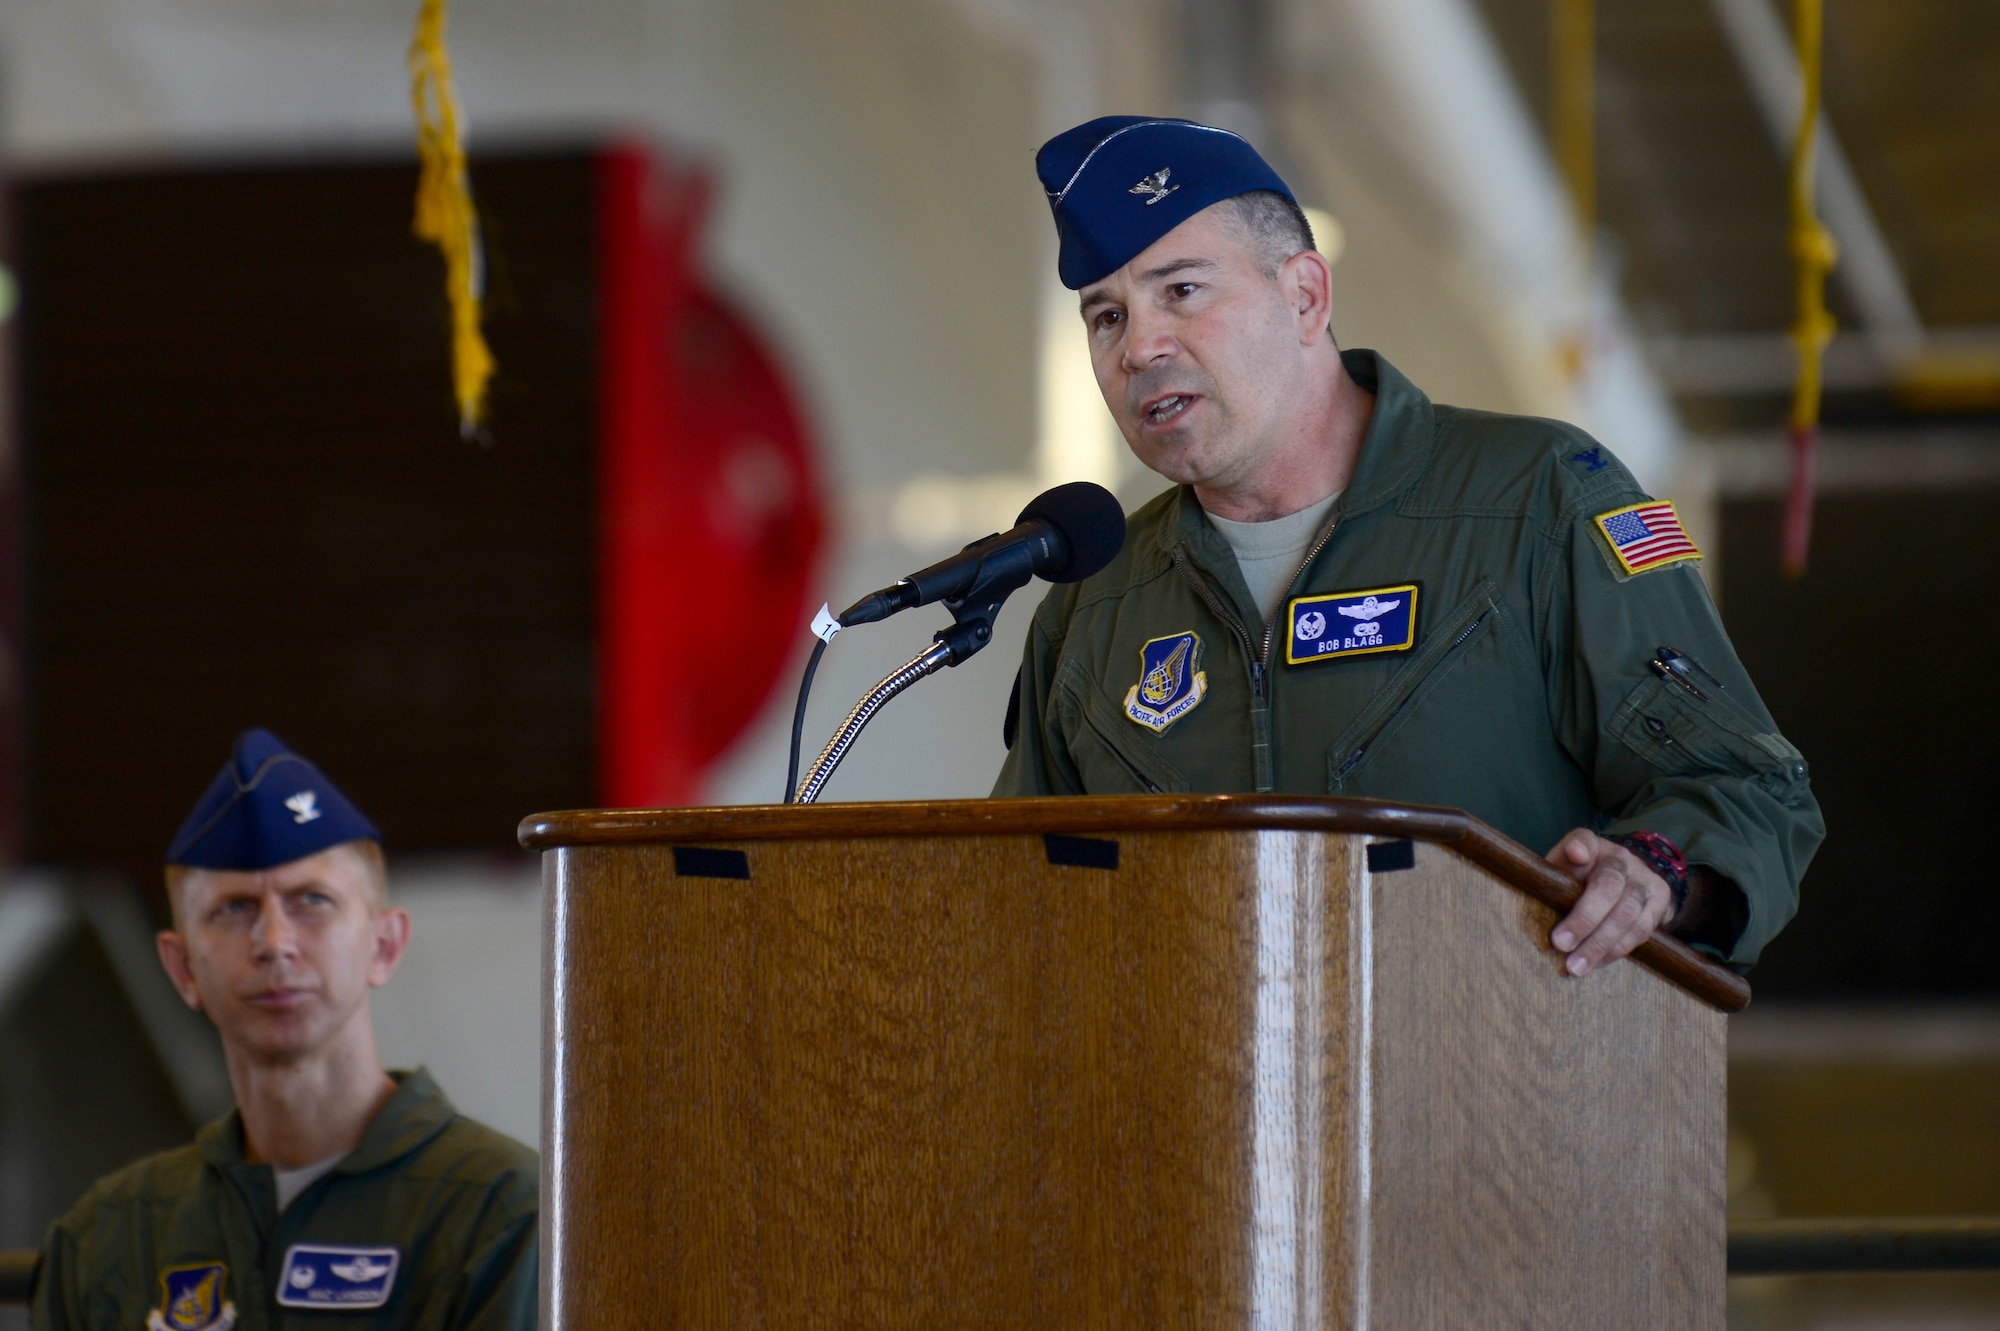 Col. Bob Blagg, 374th Operations Group commander delivers opening remarks during the opening ceremony for Operation Christmas Drop at Andersen Air Force Base, Guam, Dec. 10, 2013. This year marks the 62nd year of Operation Christmas Drop, which began in 1952, making it the world's longest running airdrop mission. Every December, C-130 Hercules crews from the 374th Airlift Wing at Yokota Air Base, Japan, partner with the 36th Wing at Andersen Air Force Base, Guam, to airlift food, supplies and toys to islanders throughout Micronesia. (U.S. Air Force photo by 2nd Lt. Jake Bailey/Released)